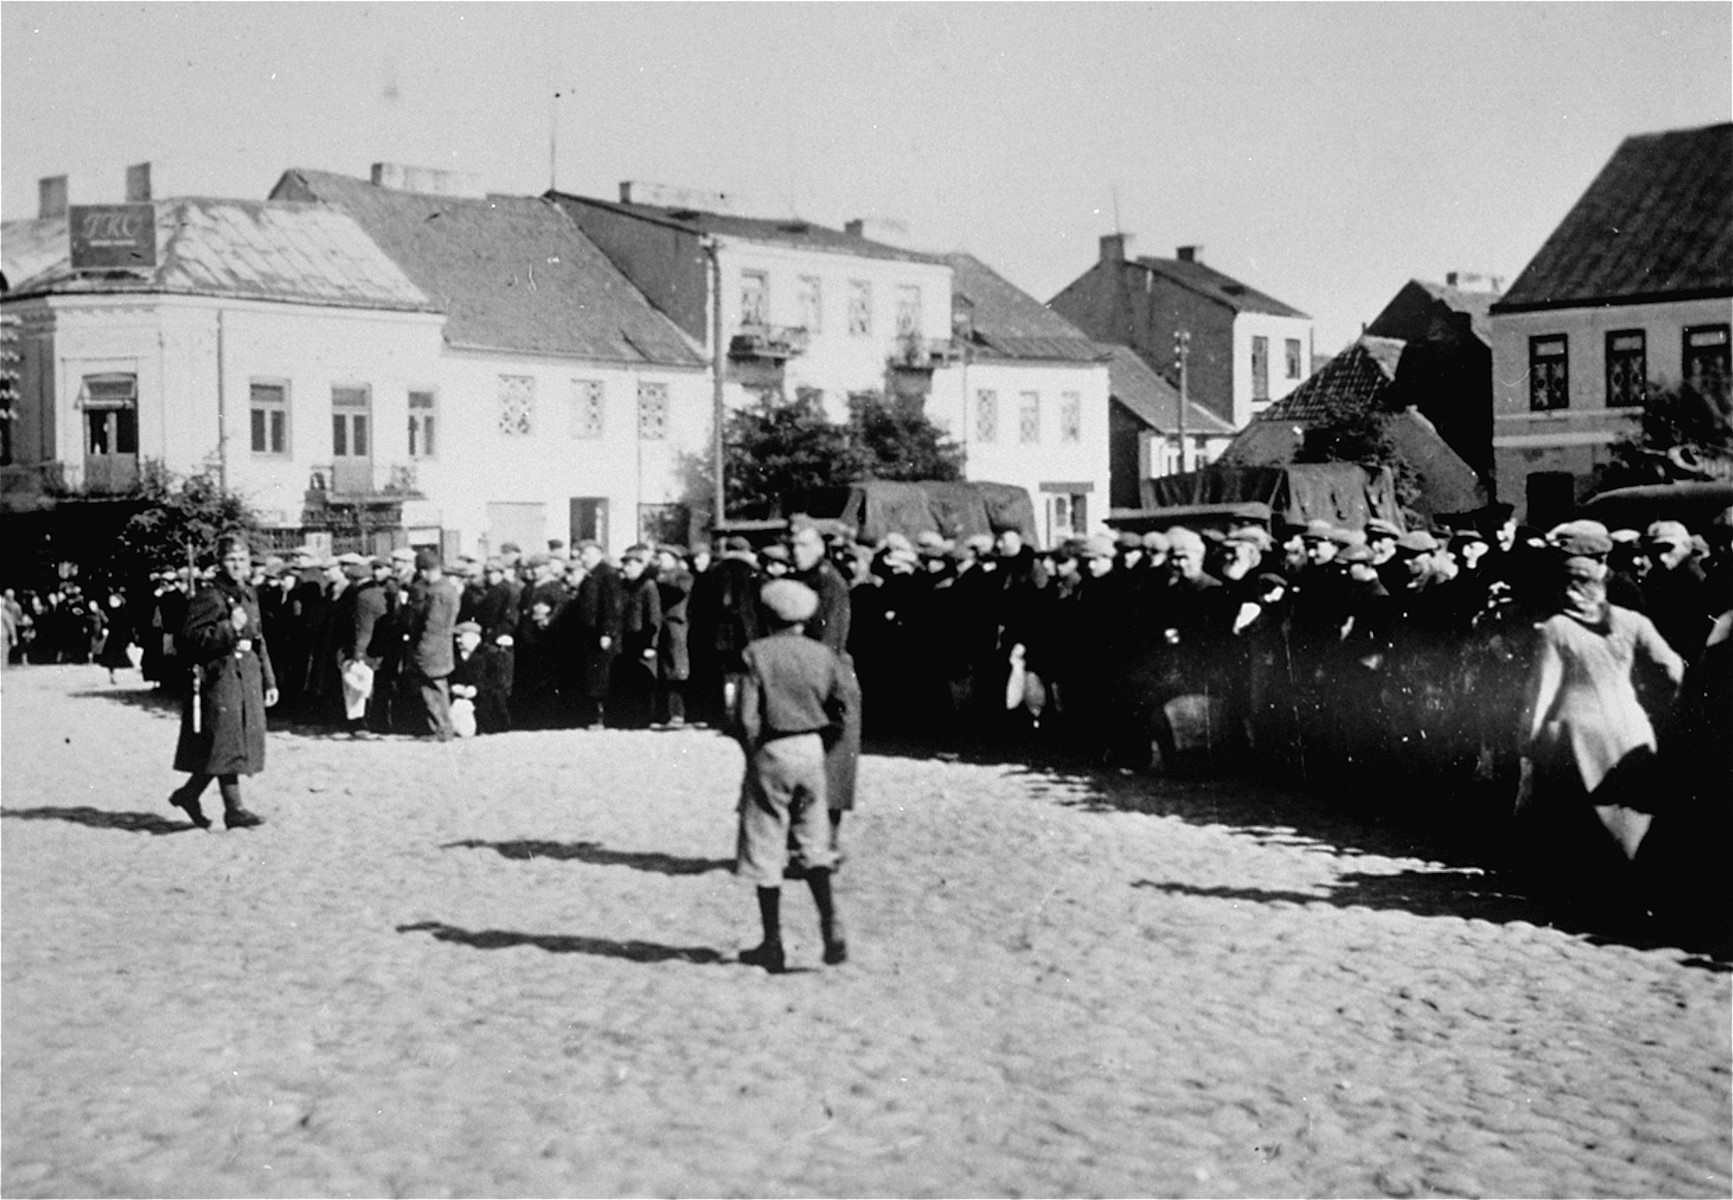 Jewish men are lined up along the perimeter of the town square in Raciaz.